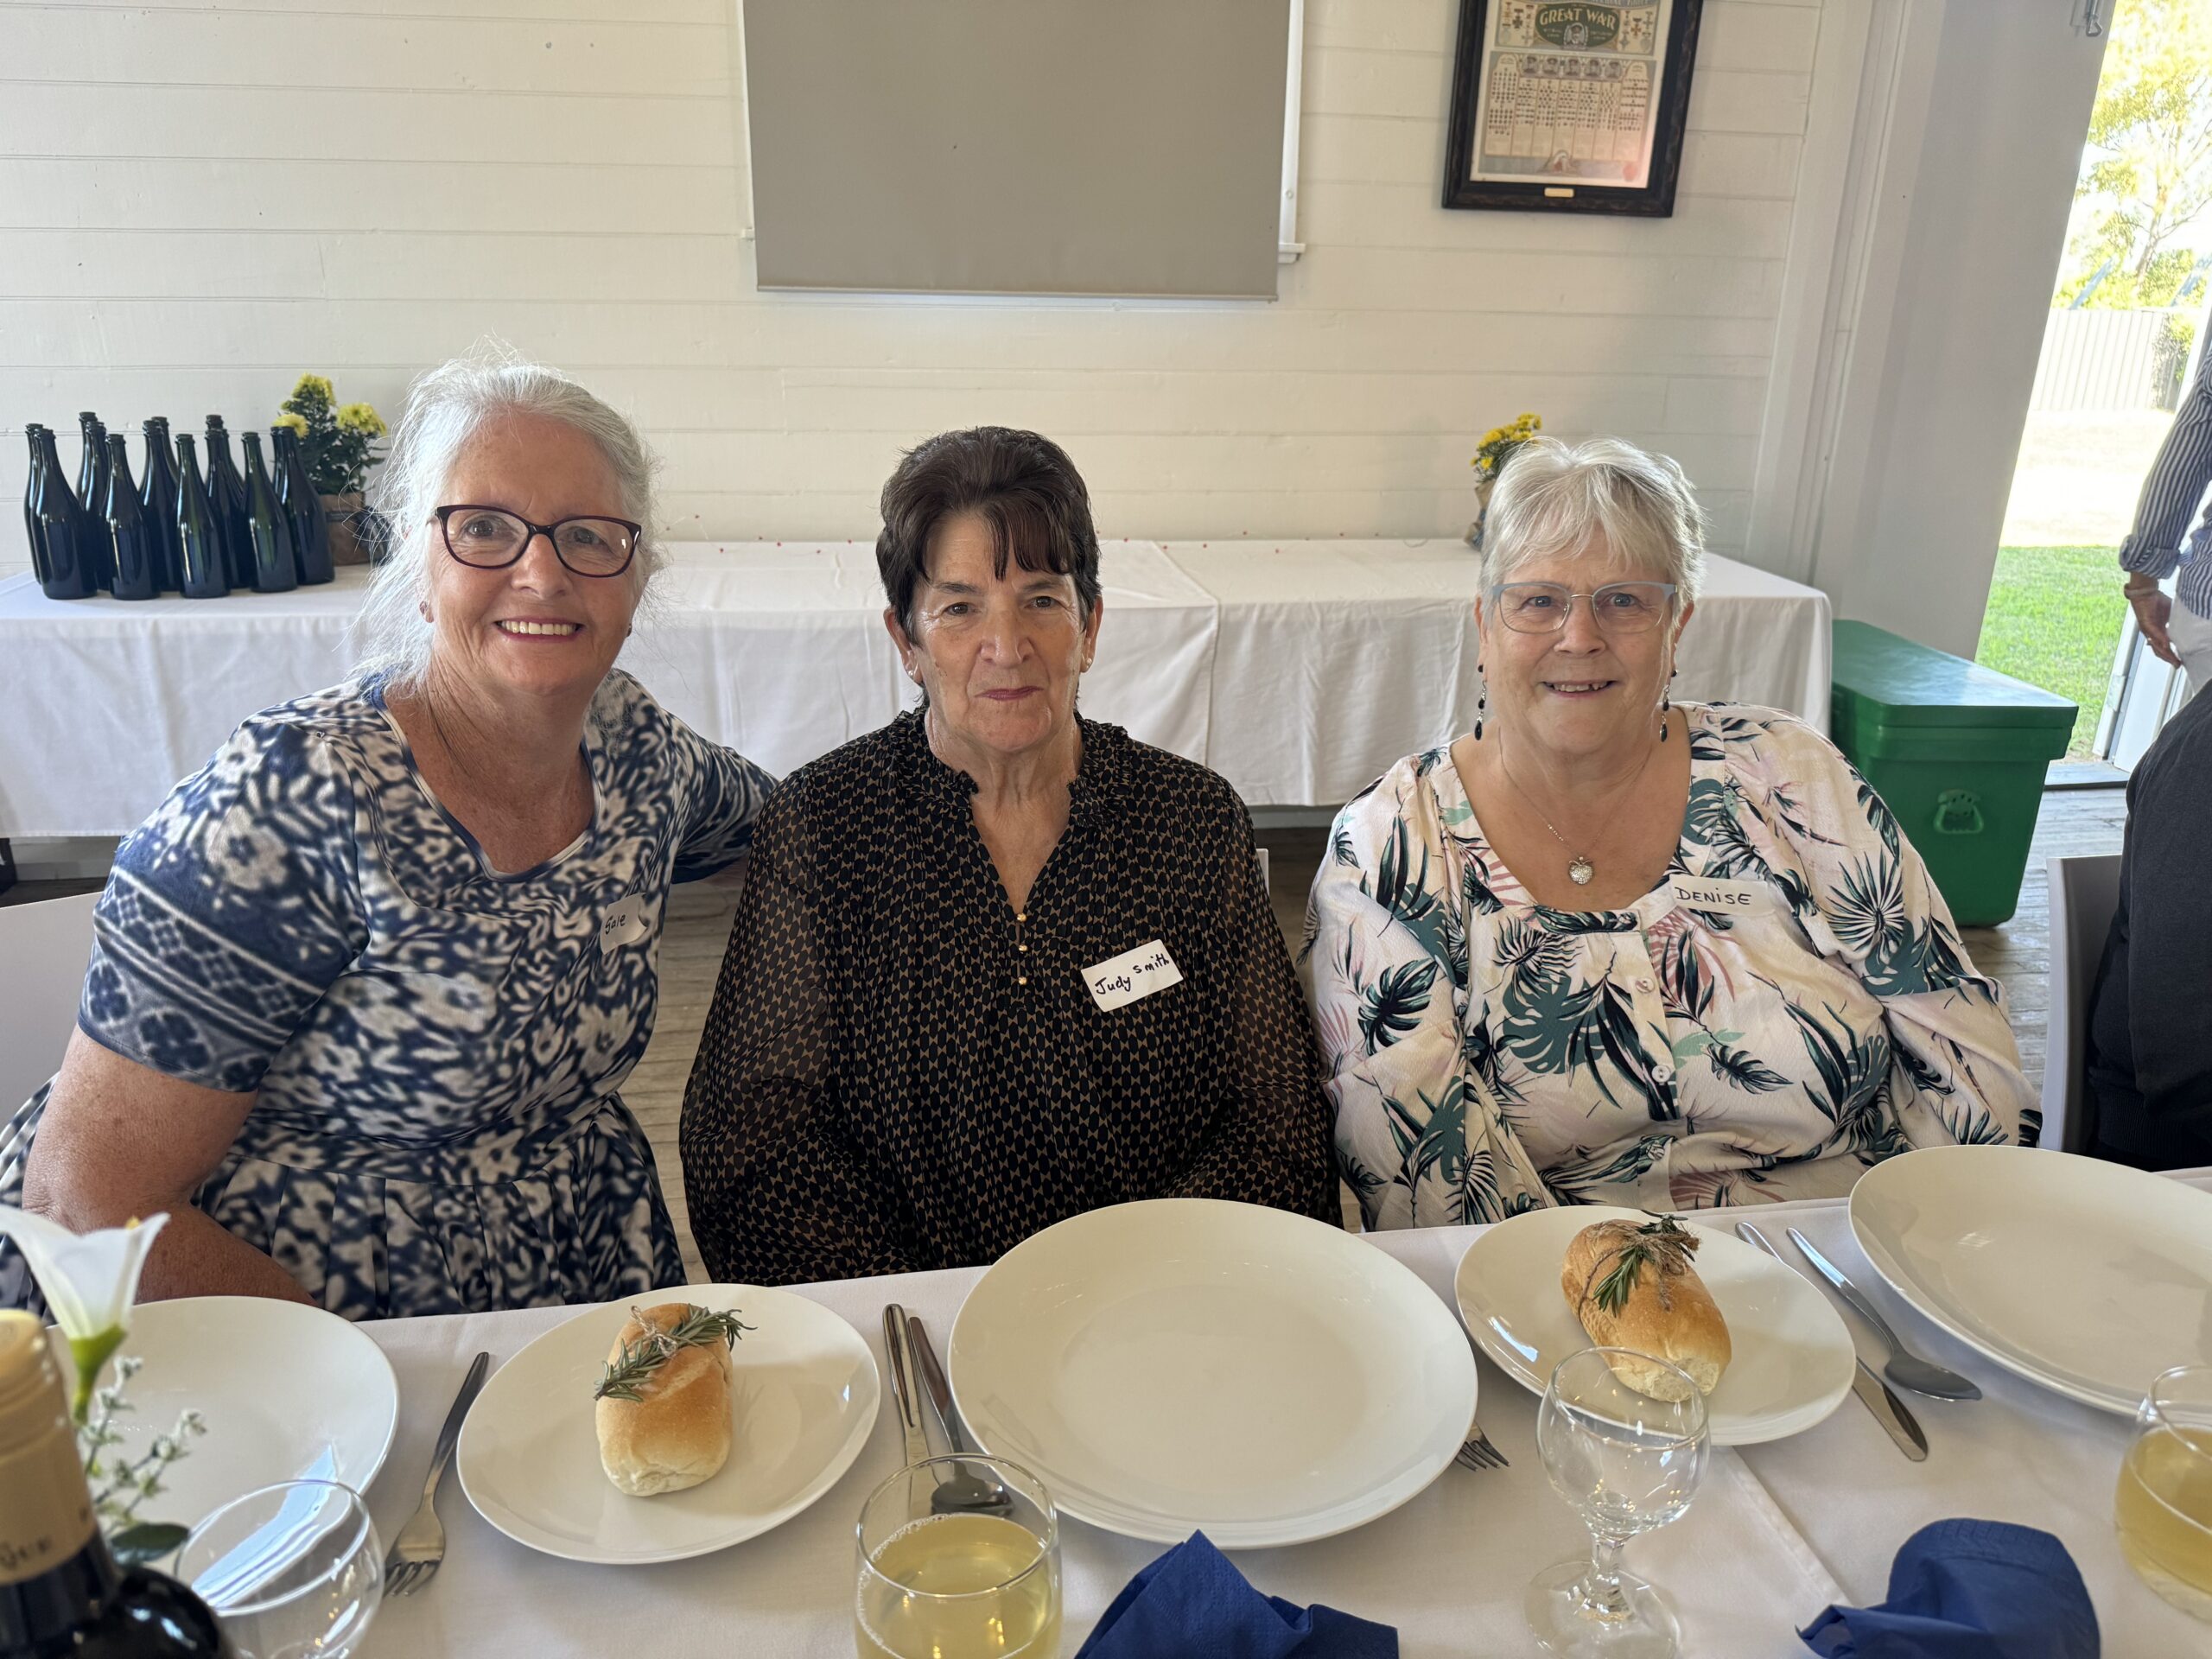 Members of the Wee Waa CWA branch the Burren Junction branch of the CWA NSW 100 years of membership celebration, Gale Hewitt, Judy Smith and Denise Robinson.